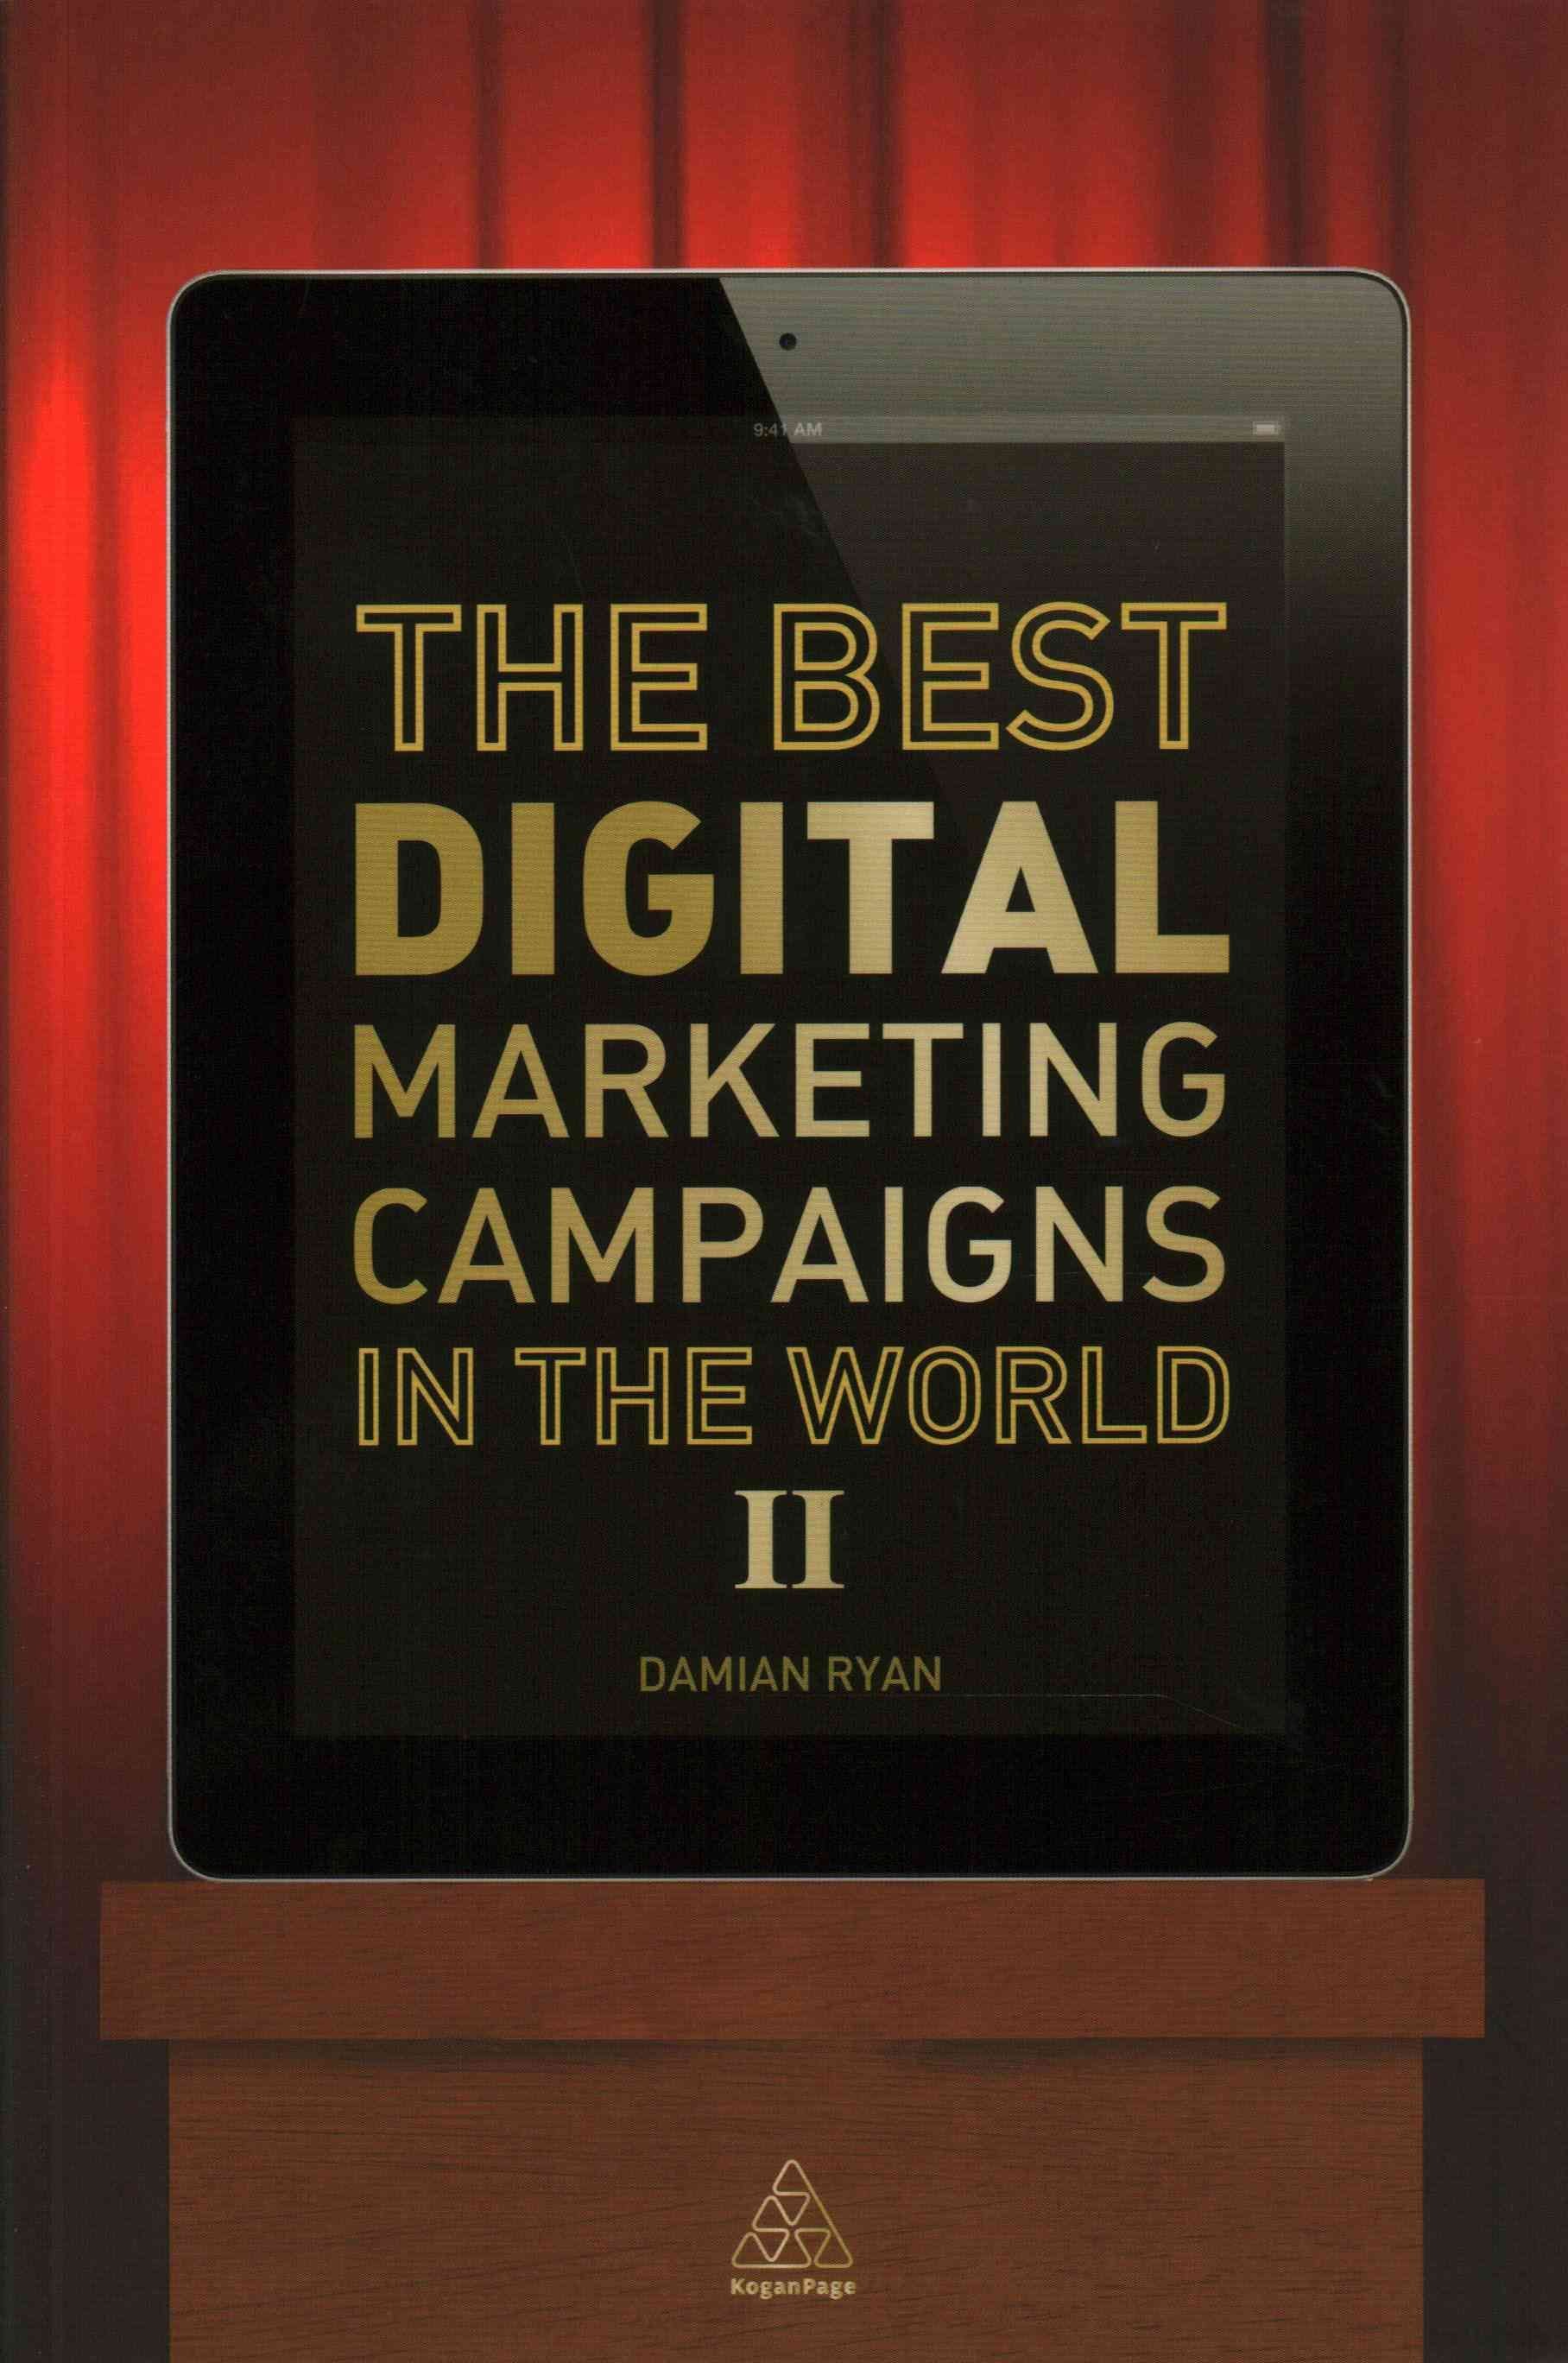 The Best Digital Marketing Campaigns in the World II